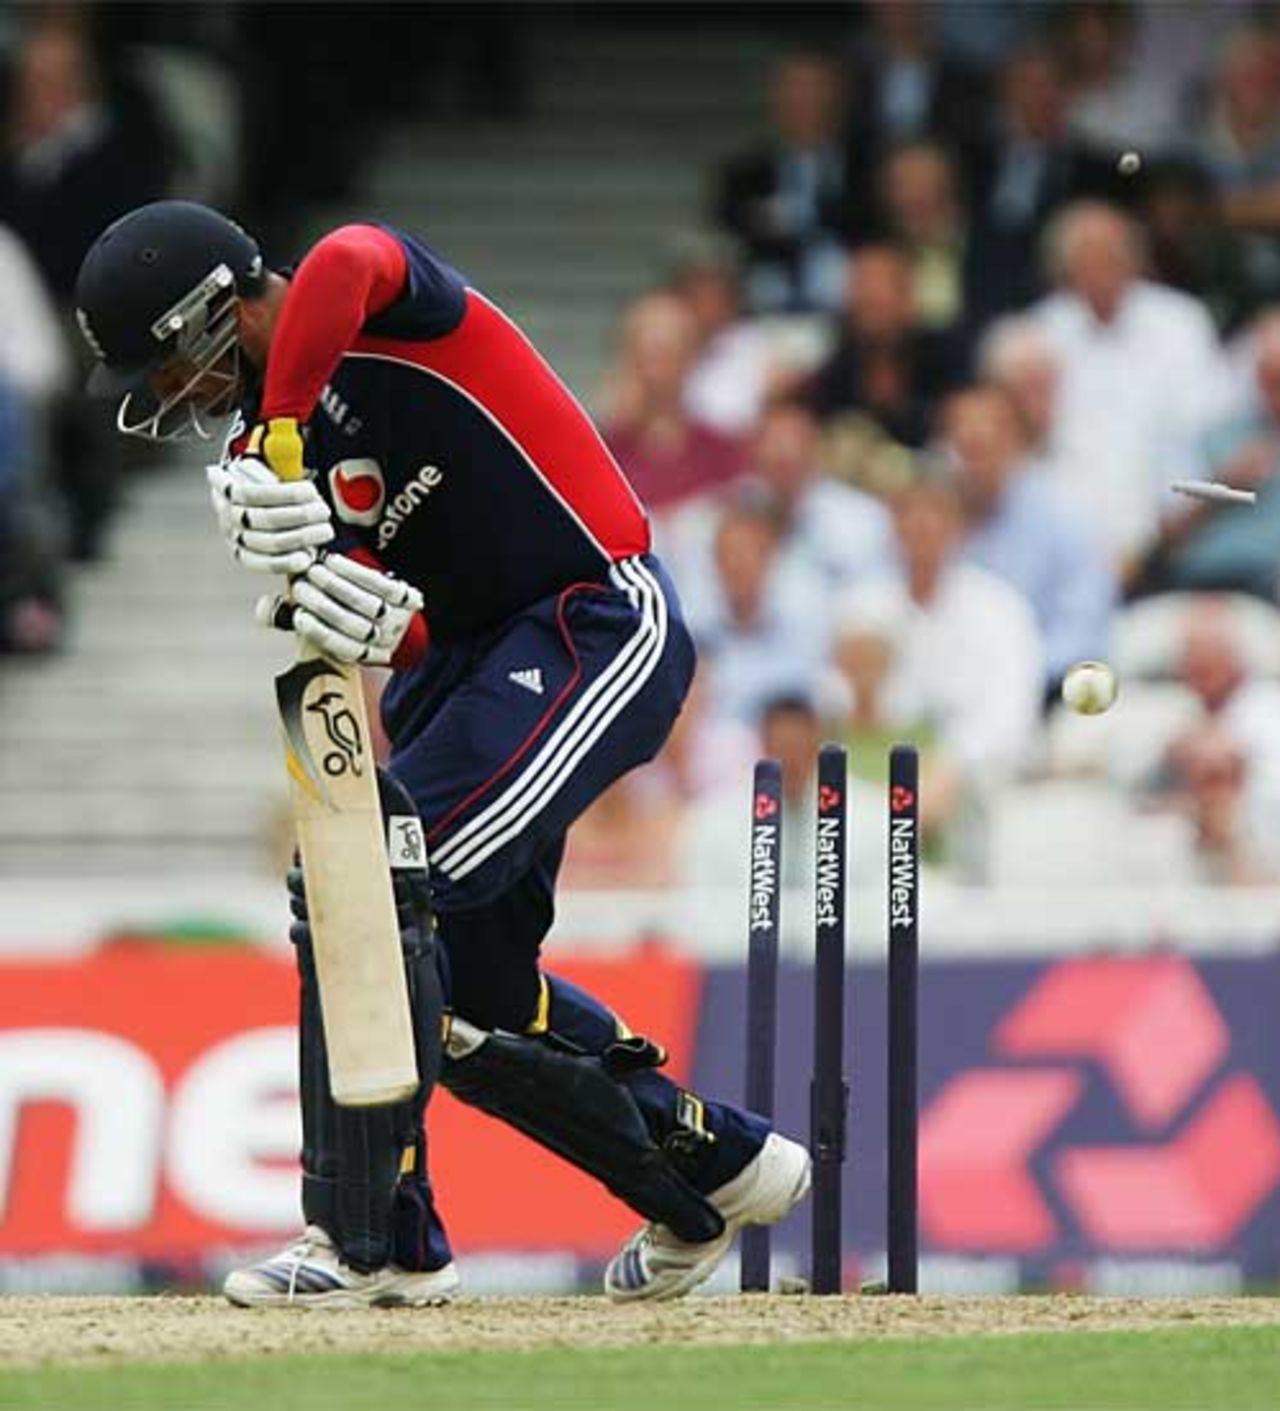 Owais Shah is bowled by Jacques Kallis as South Africa fight back, England v South Africa, 3rd ODI, The Oval, August 29, 2008